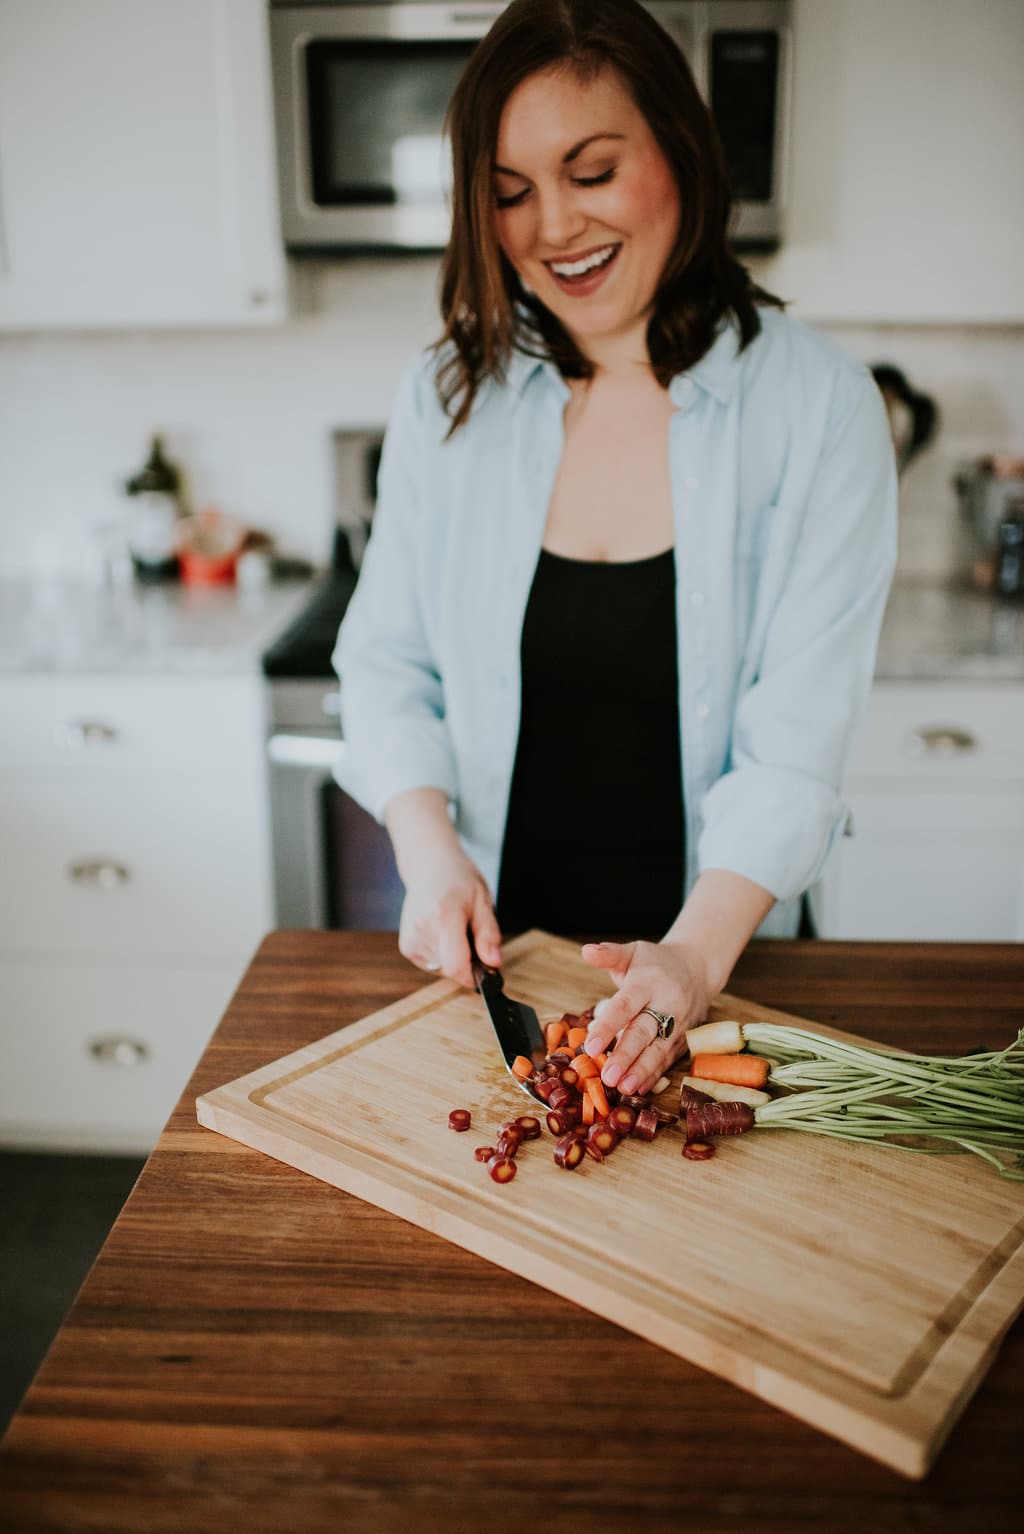 Woman smiling and laughing and scooping up chopped rainbow carrots with a chef's knife on a wooden cutting board